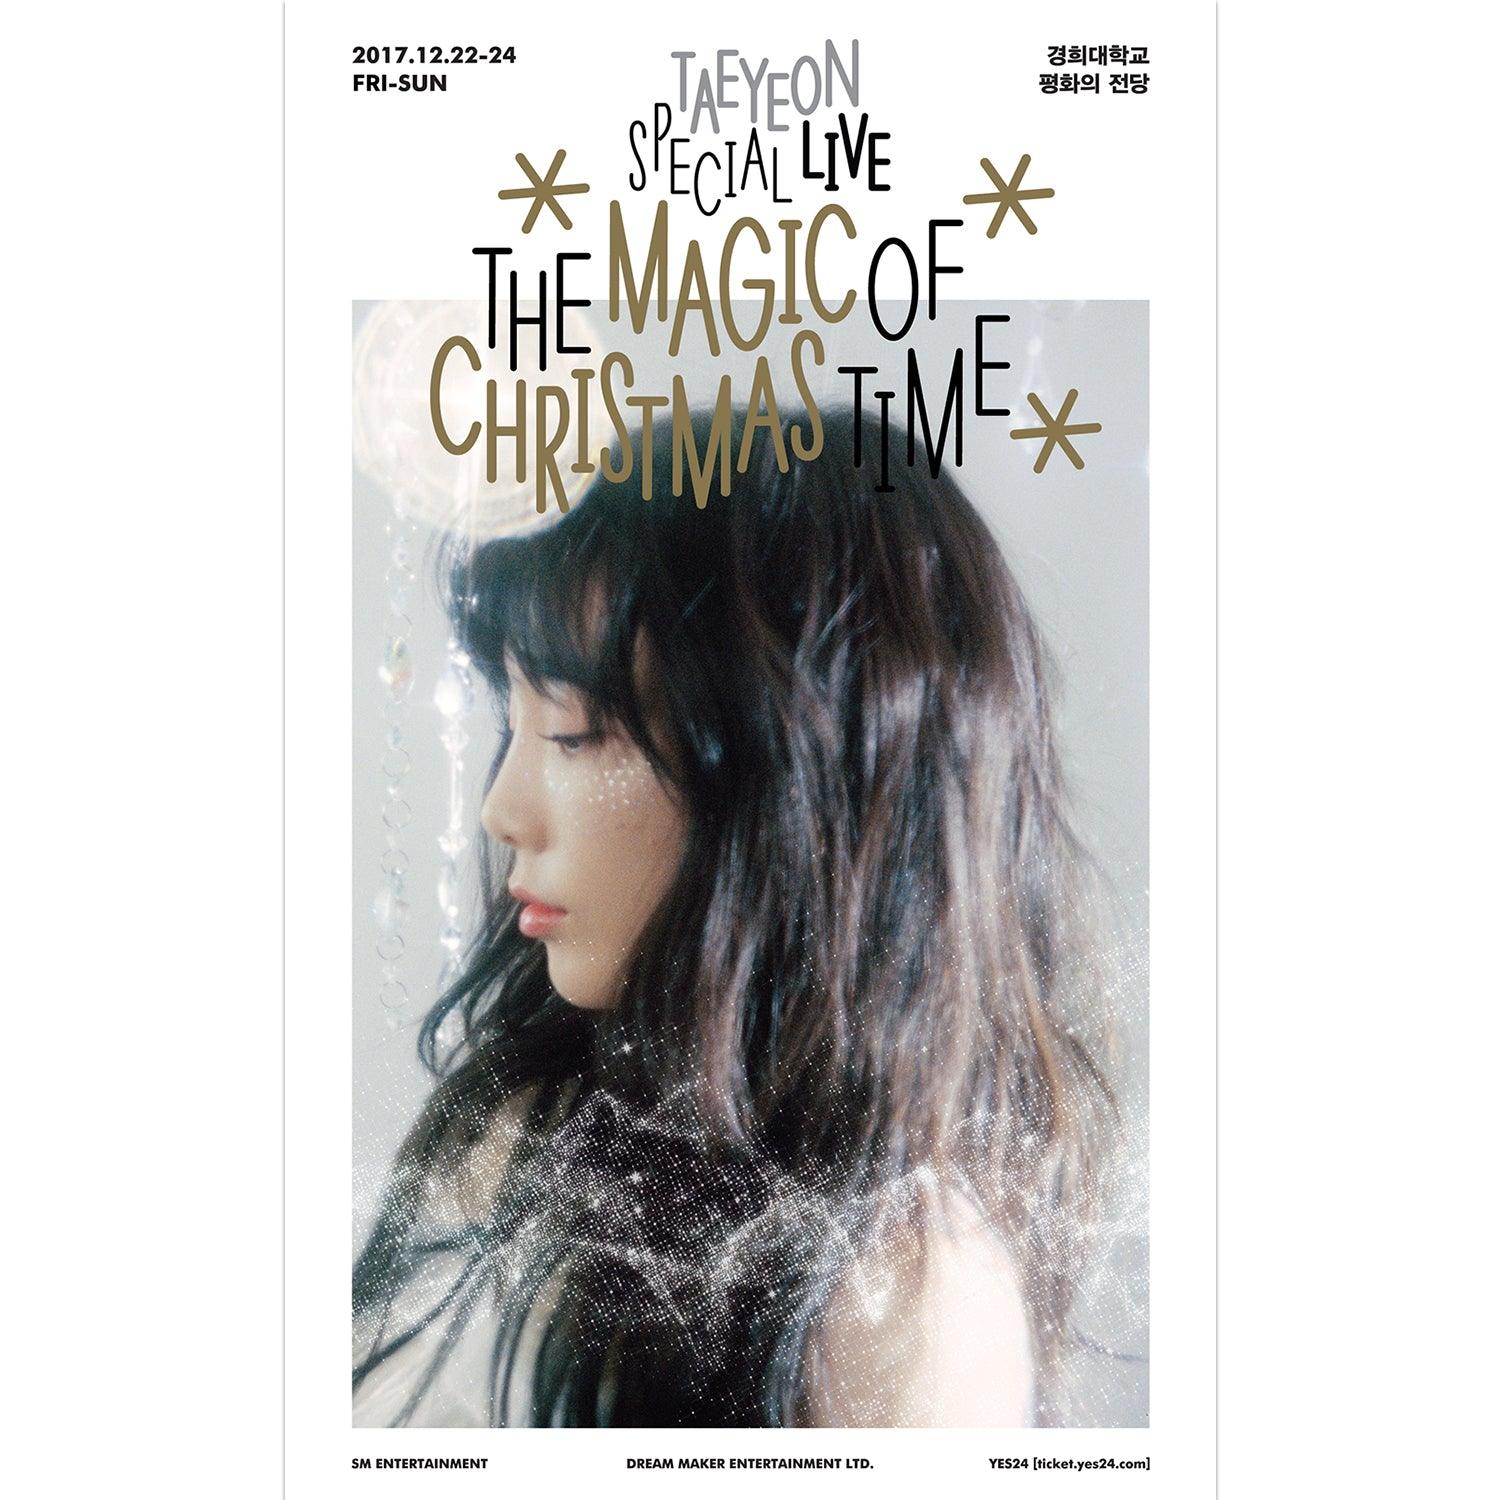 TAEYEON 'THE MAGIC OF CHRISTMAS TIME' SPECIAL LIVE  DVD